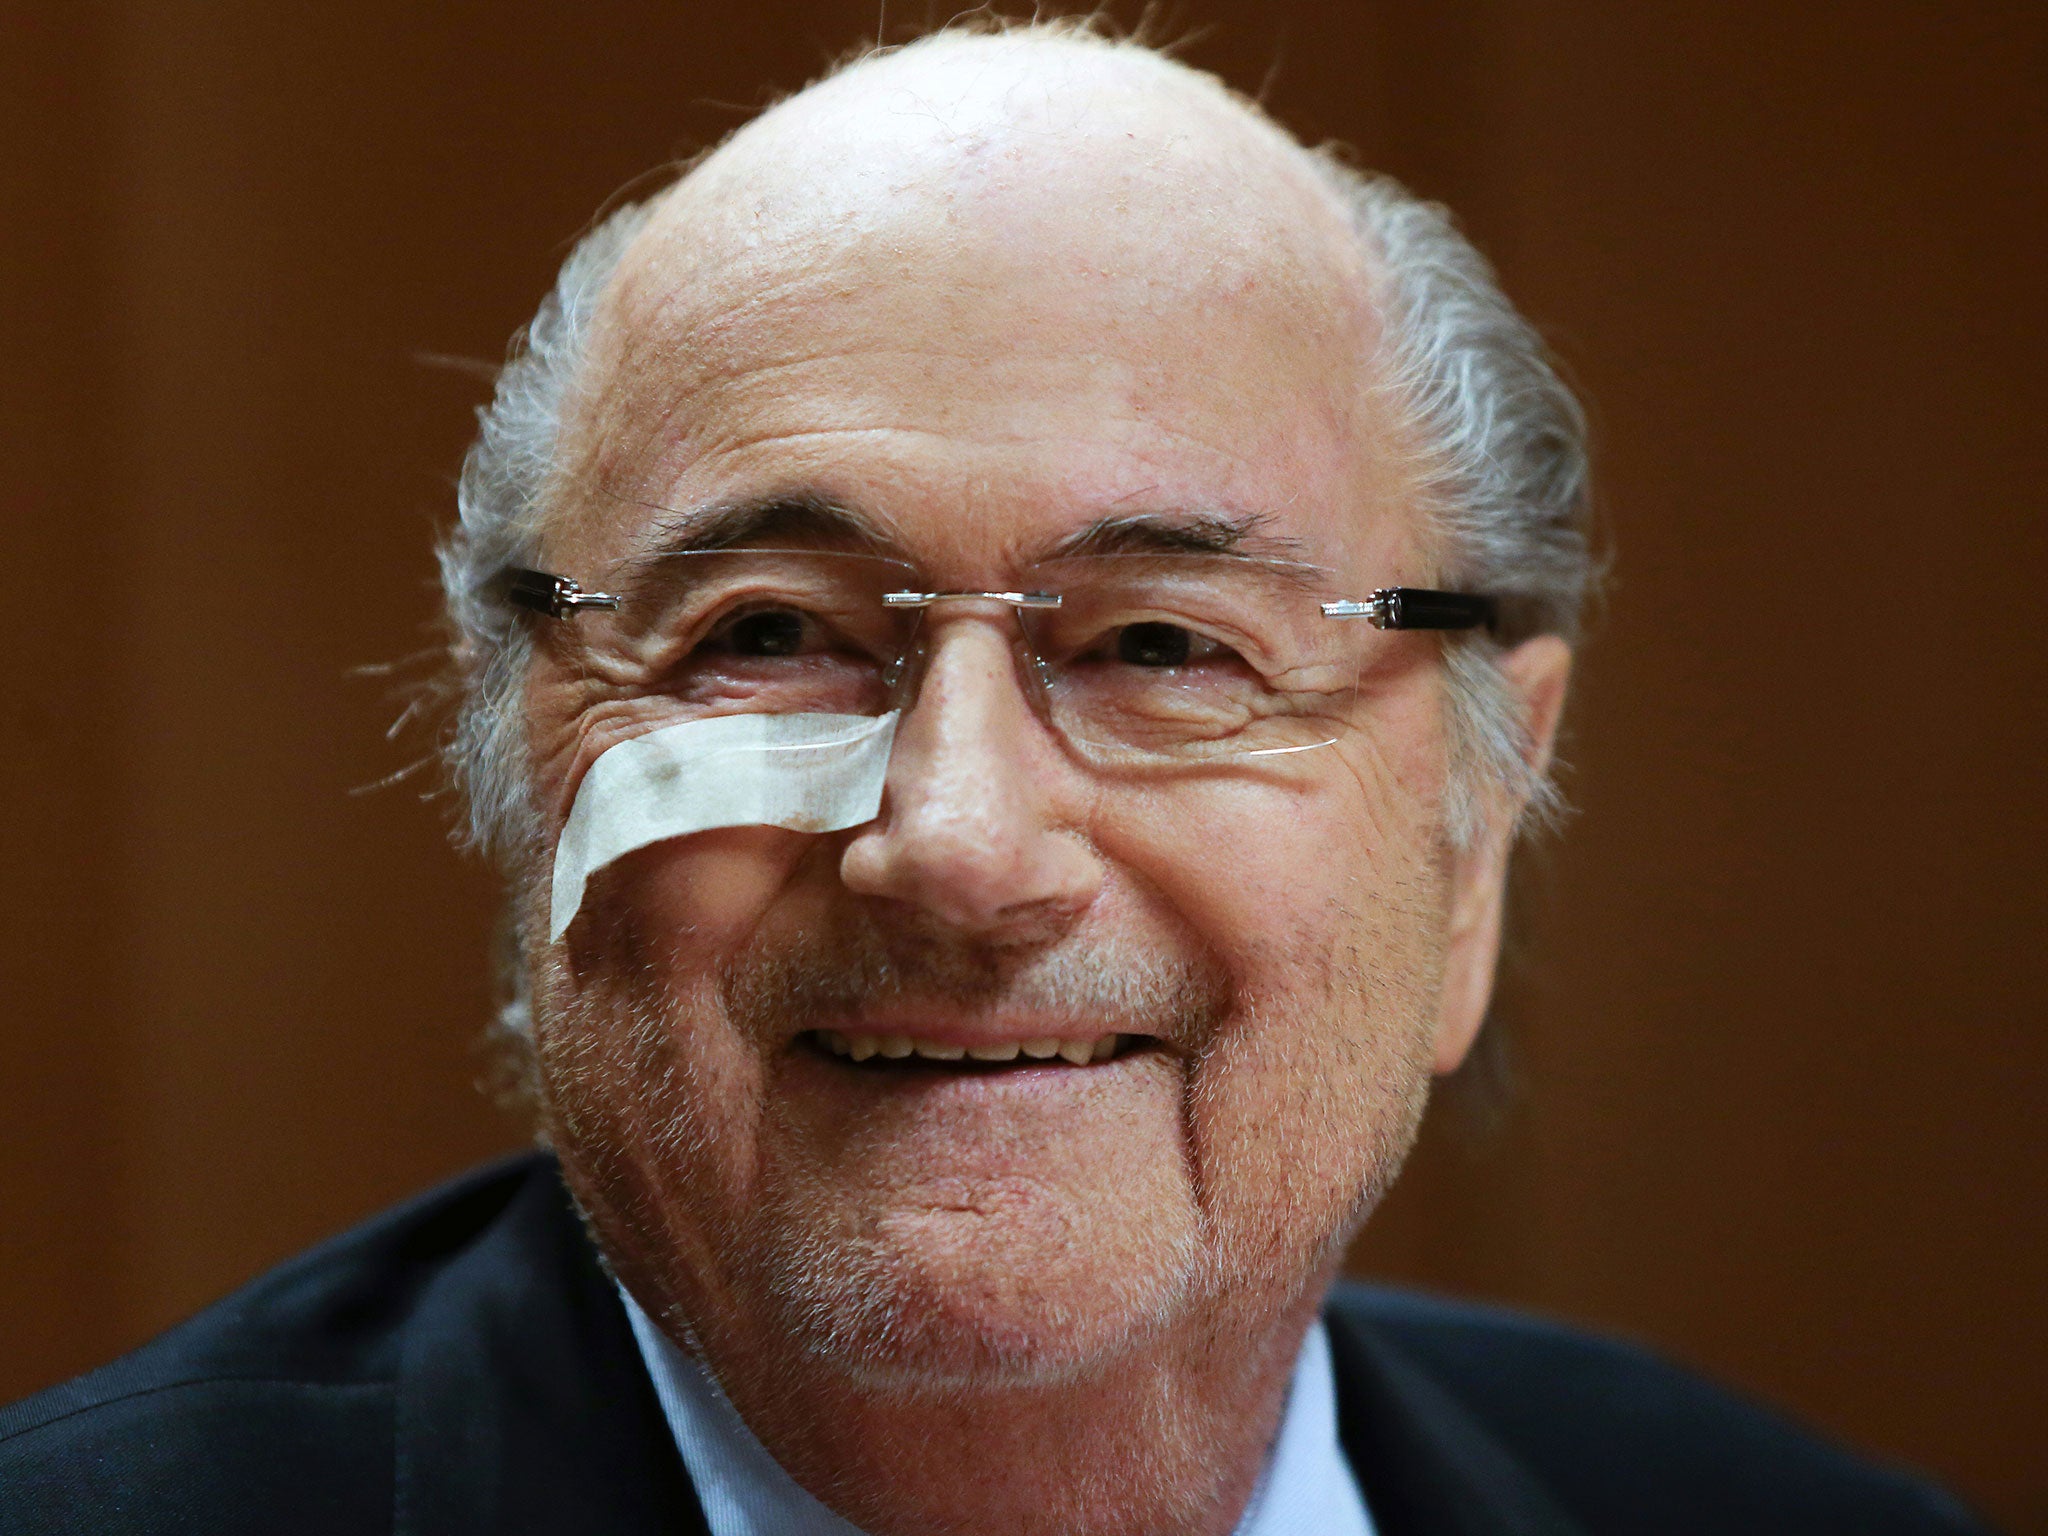 Sepp Blatter held a press conference for nearly an hour to address his eight-year ban from football